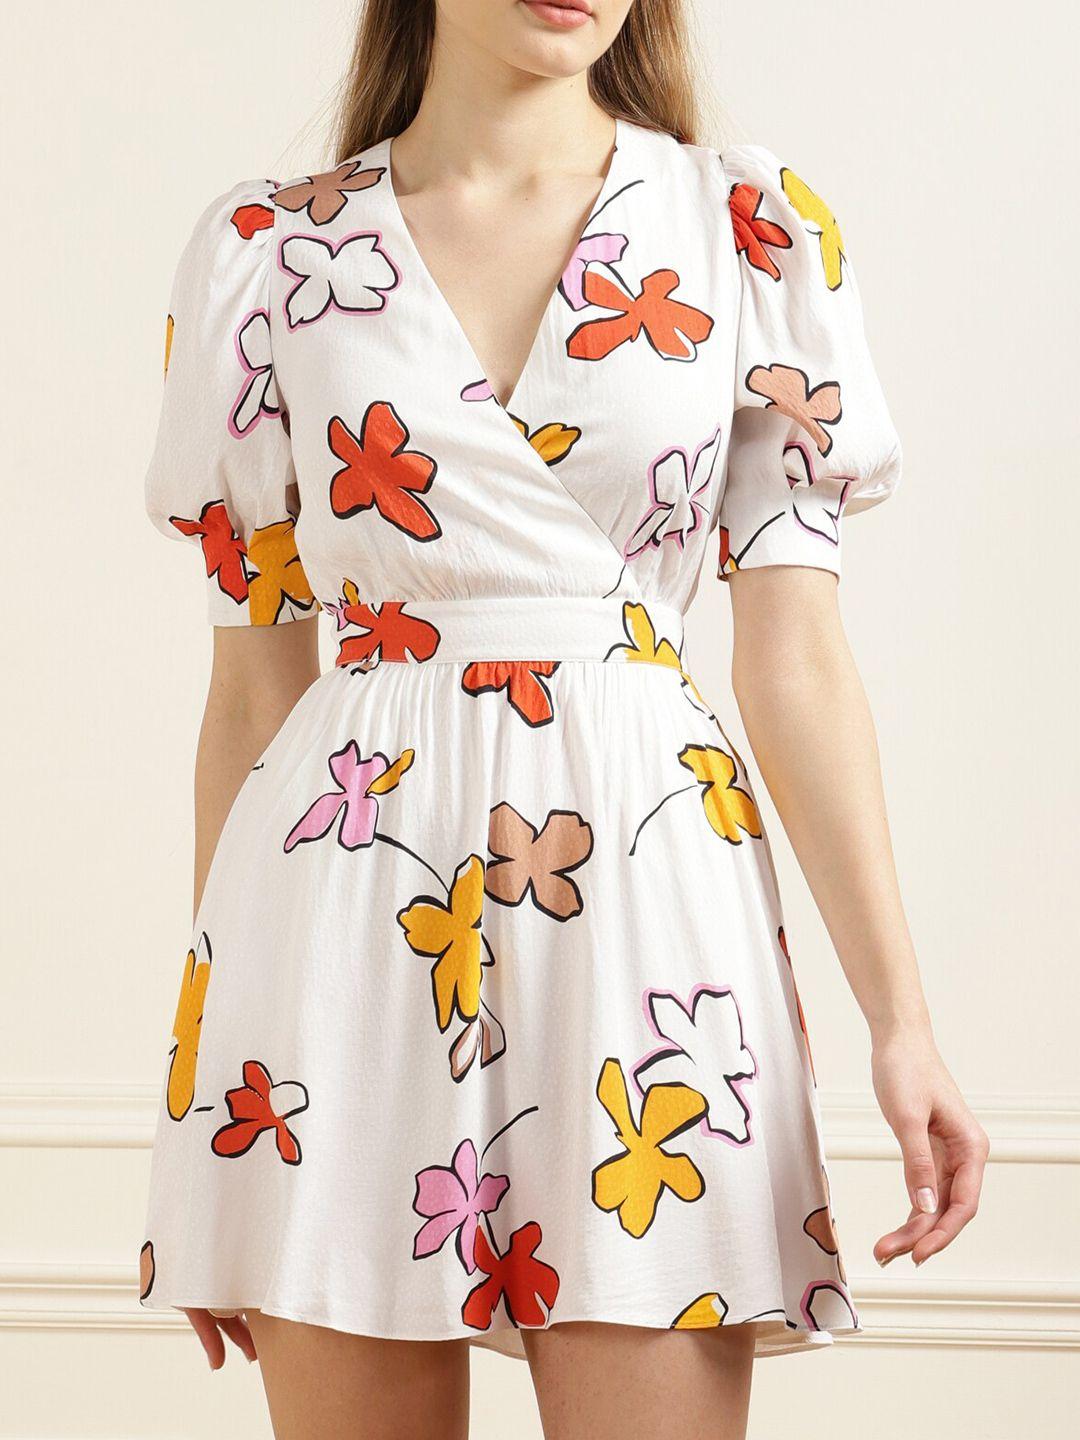 ted baker white & yellow floral dress